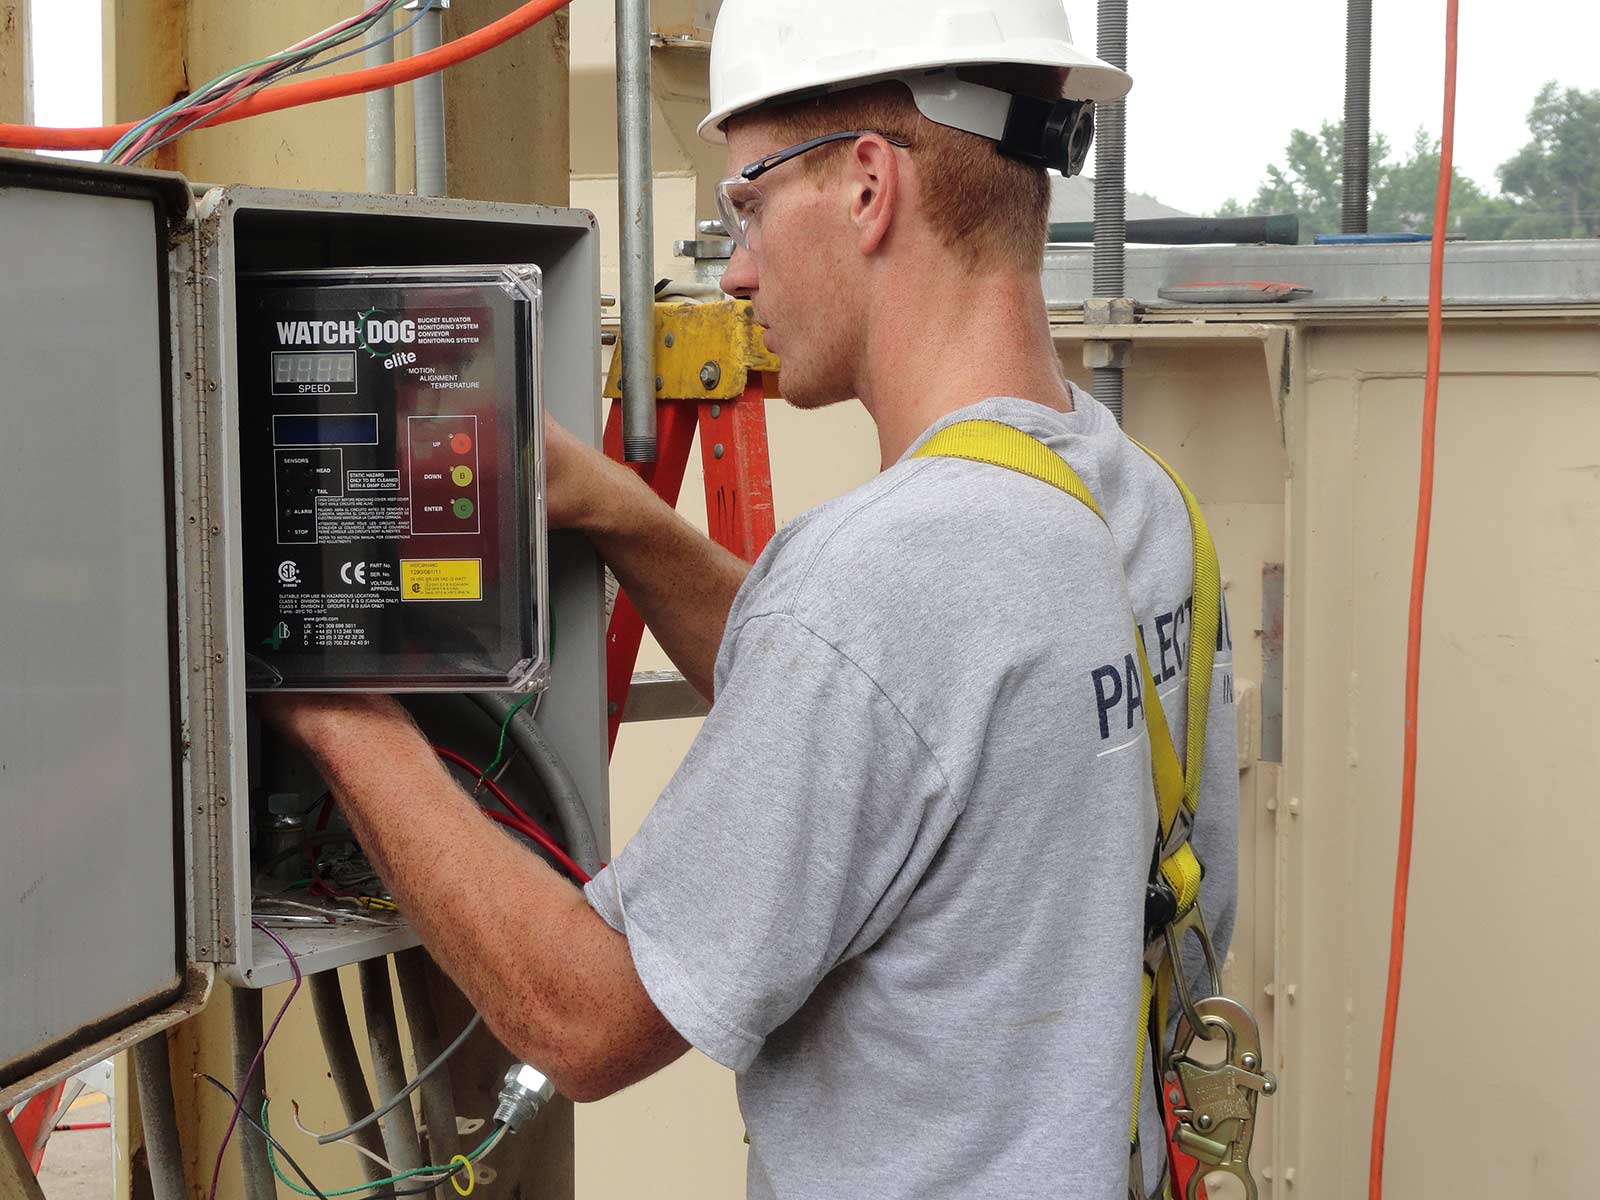 Pals Electric electrician working on an automation controls system in a service panel